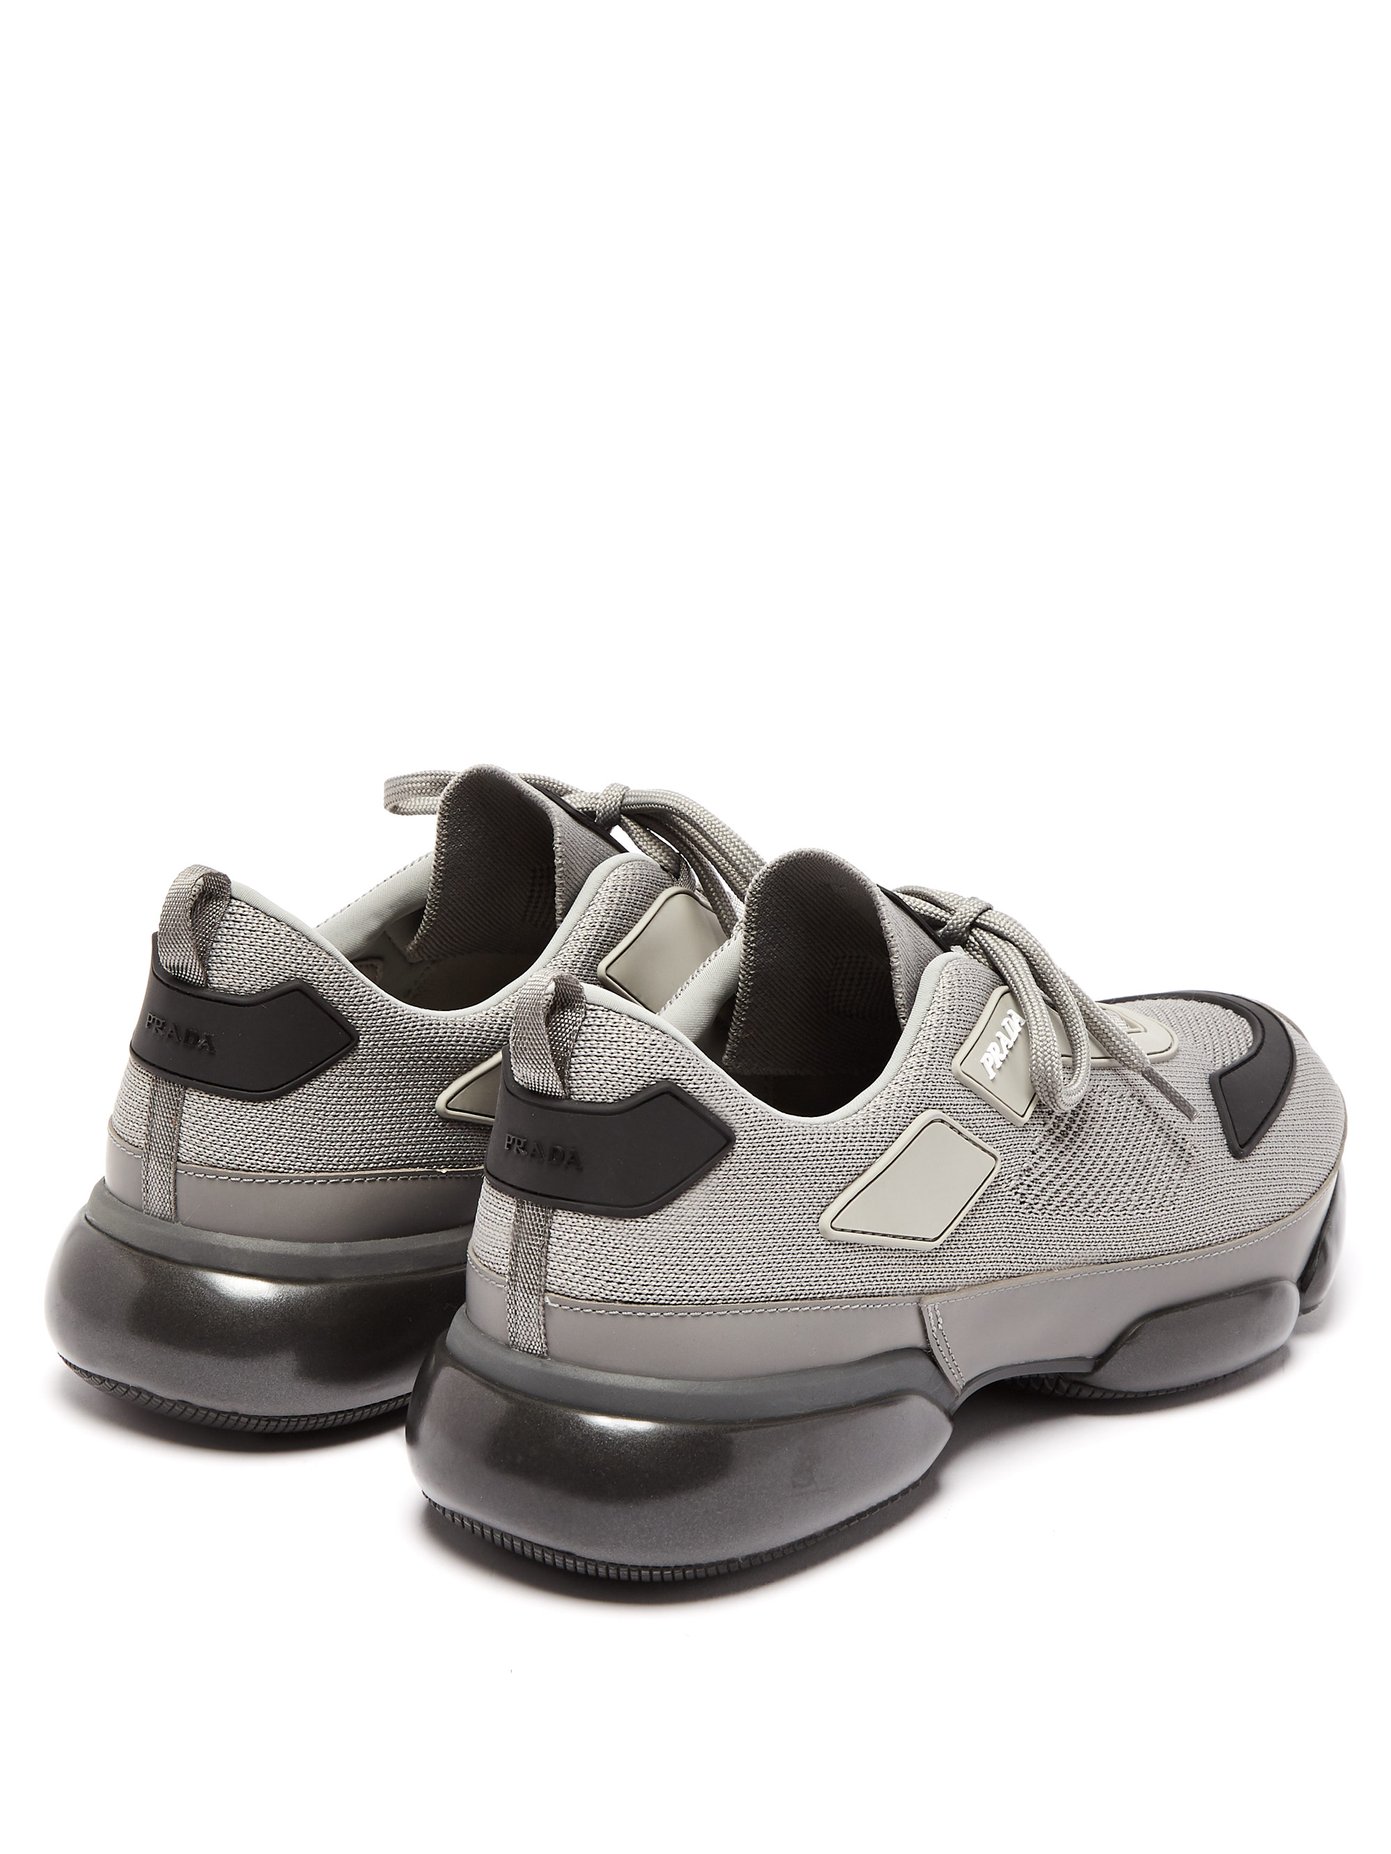 Prada Cloudbust Mesh, Rubber And Leather Sneakers - Gray In F0Ekq Cromo ...